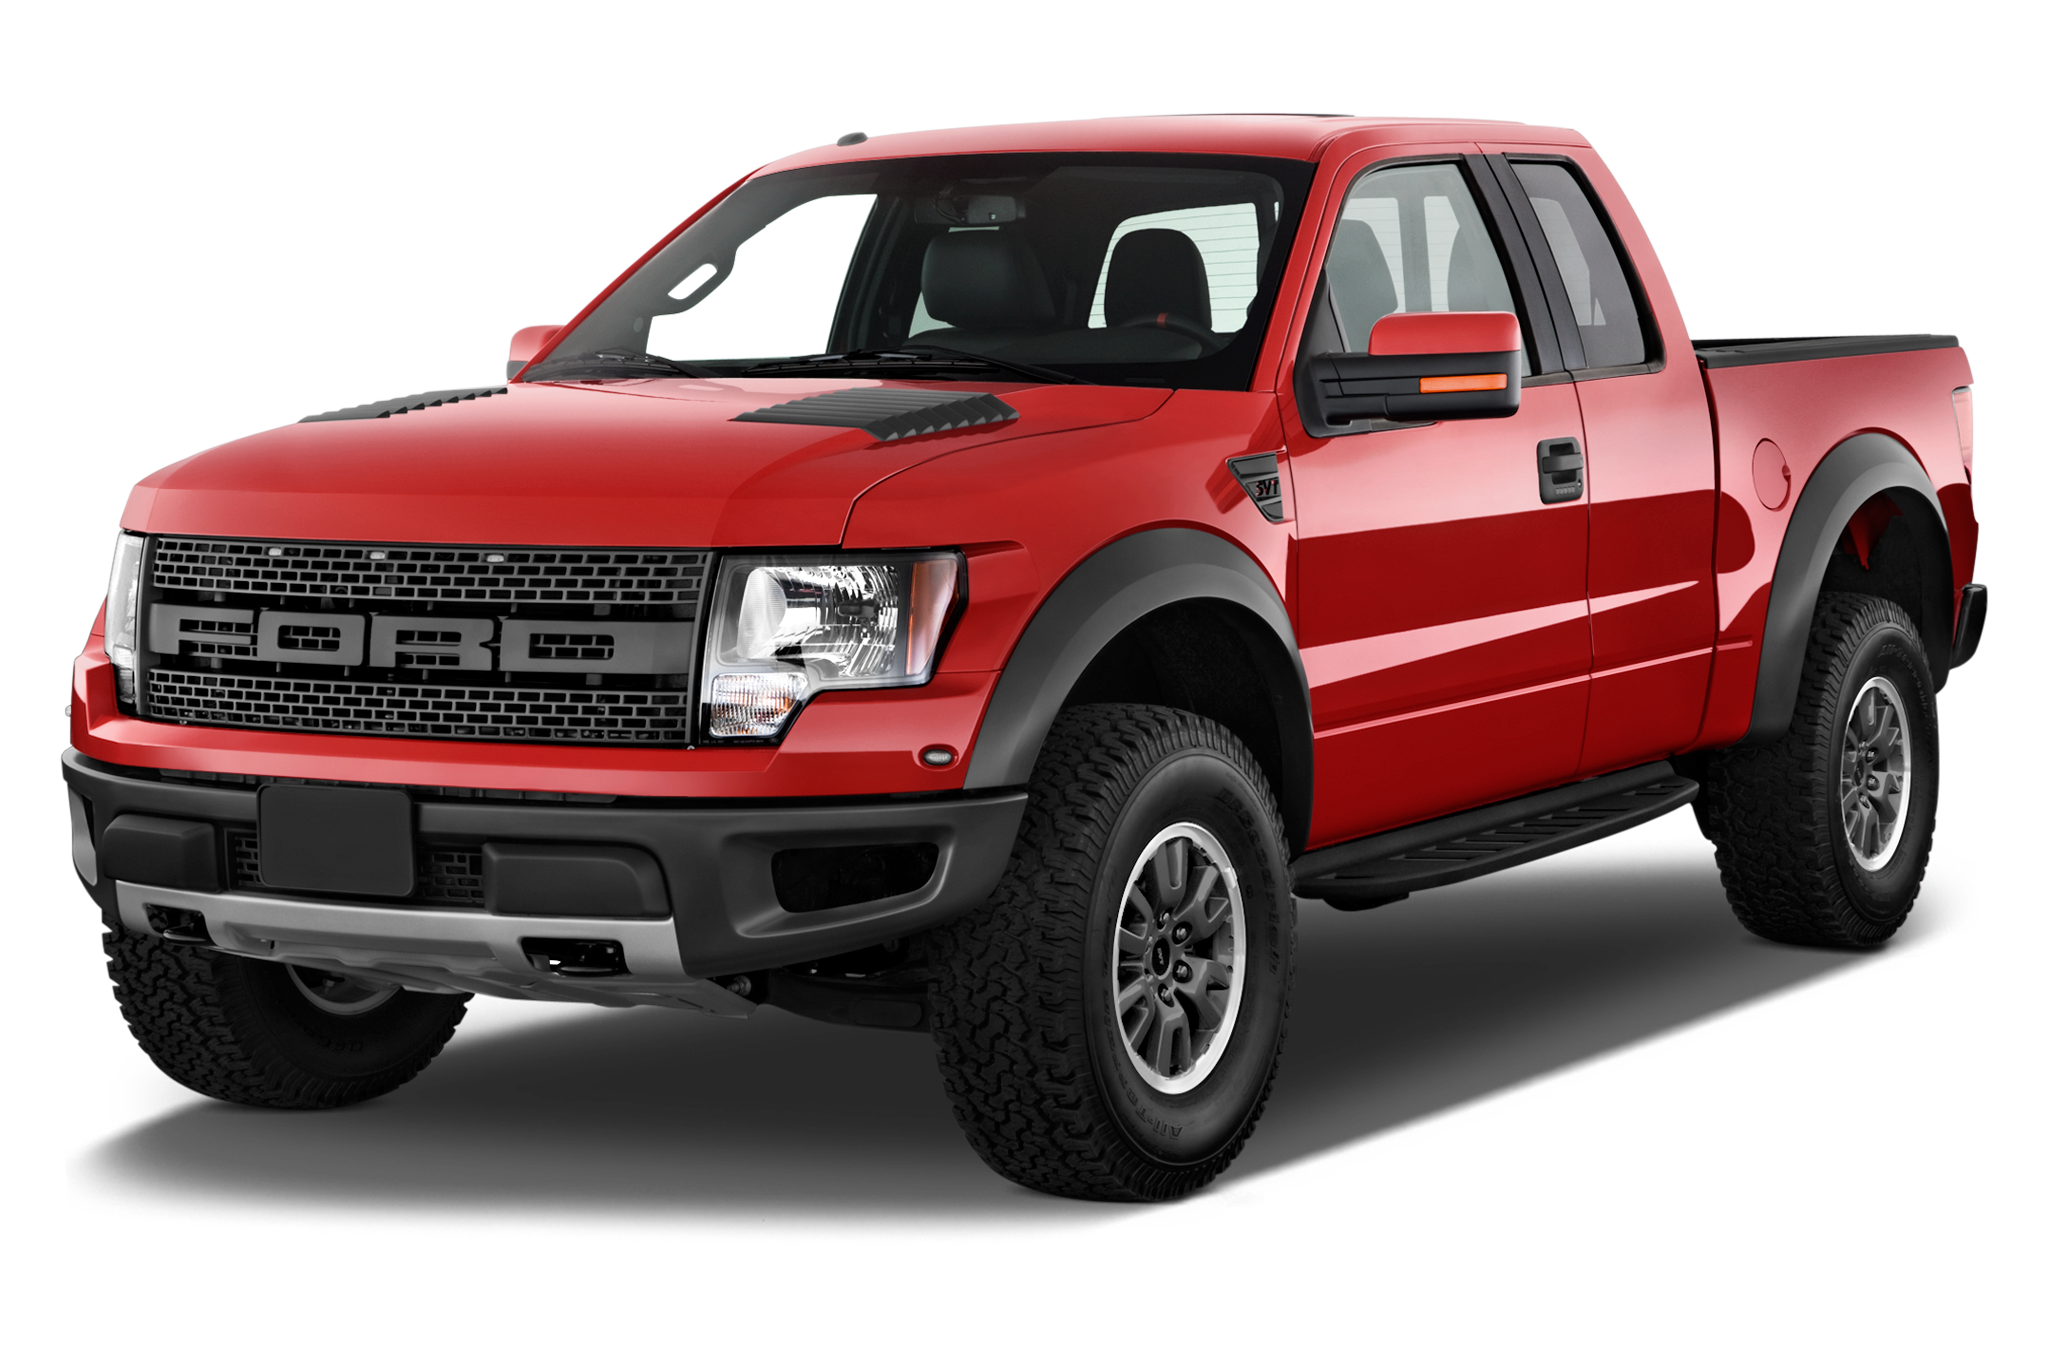 Cash For Cars Trucks and SUVs in Temecula